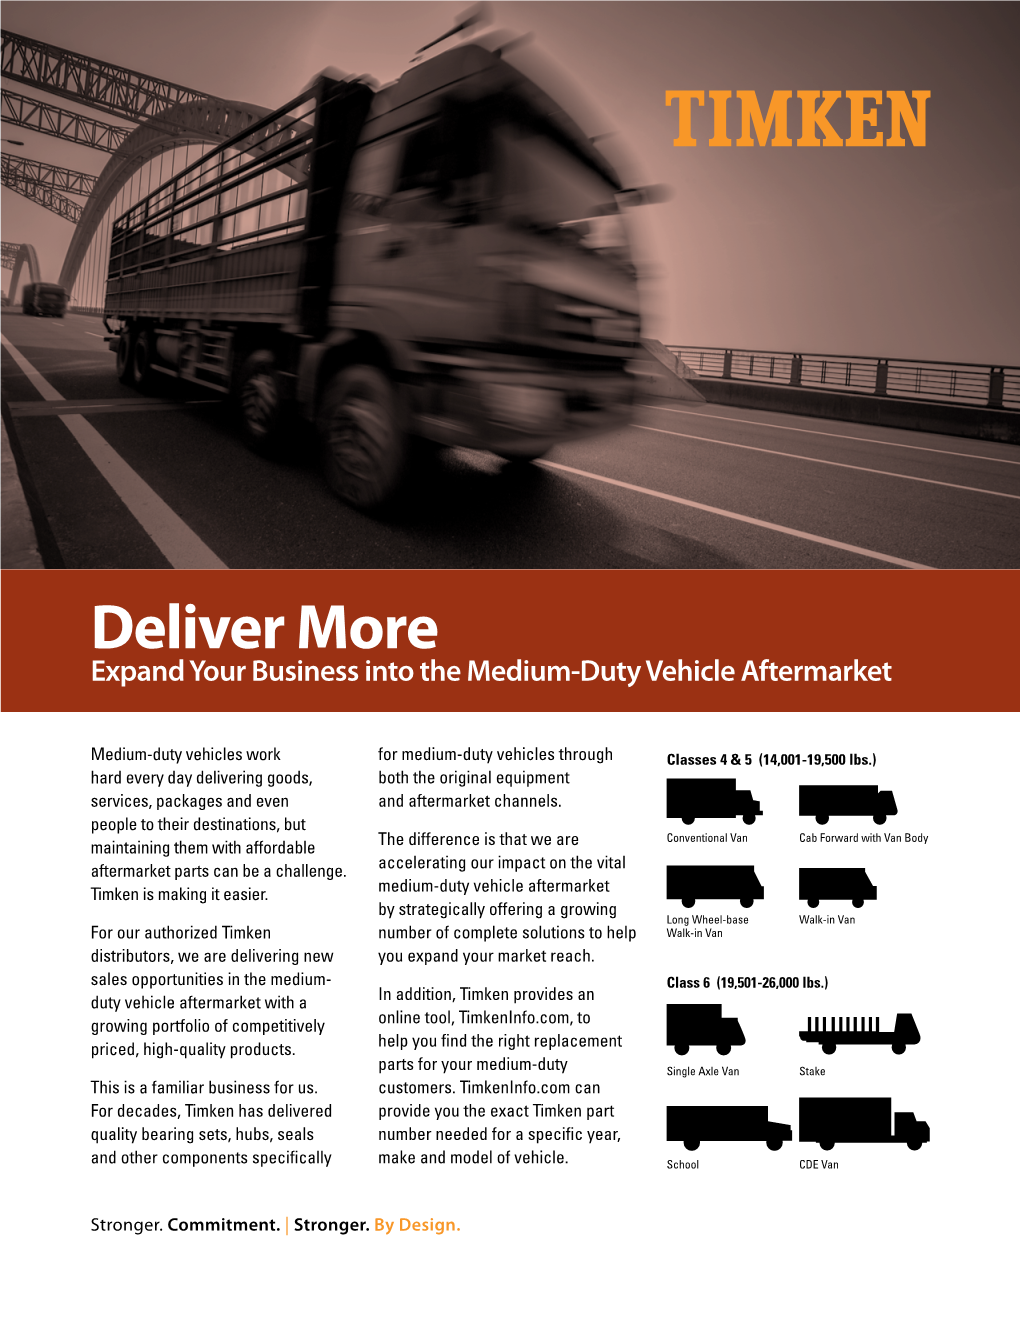 Deliver More Expand Your Business Into the Medium-Duty Vehicle Aftermarket